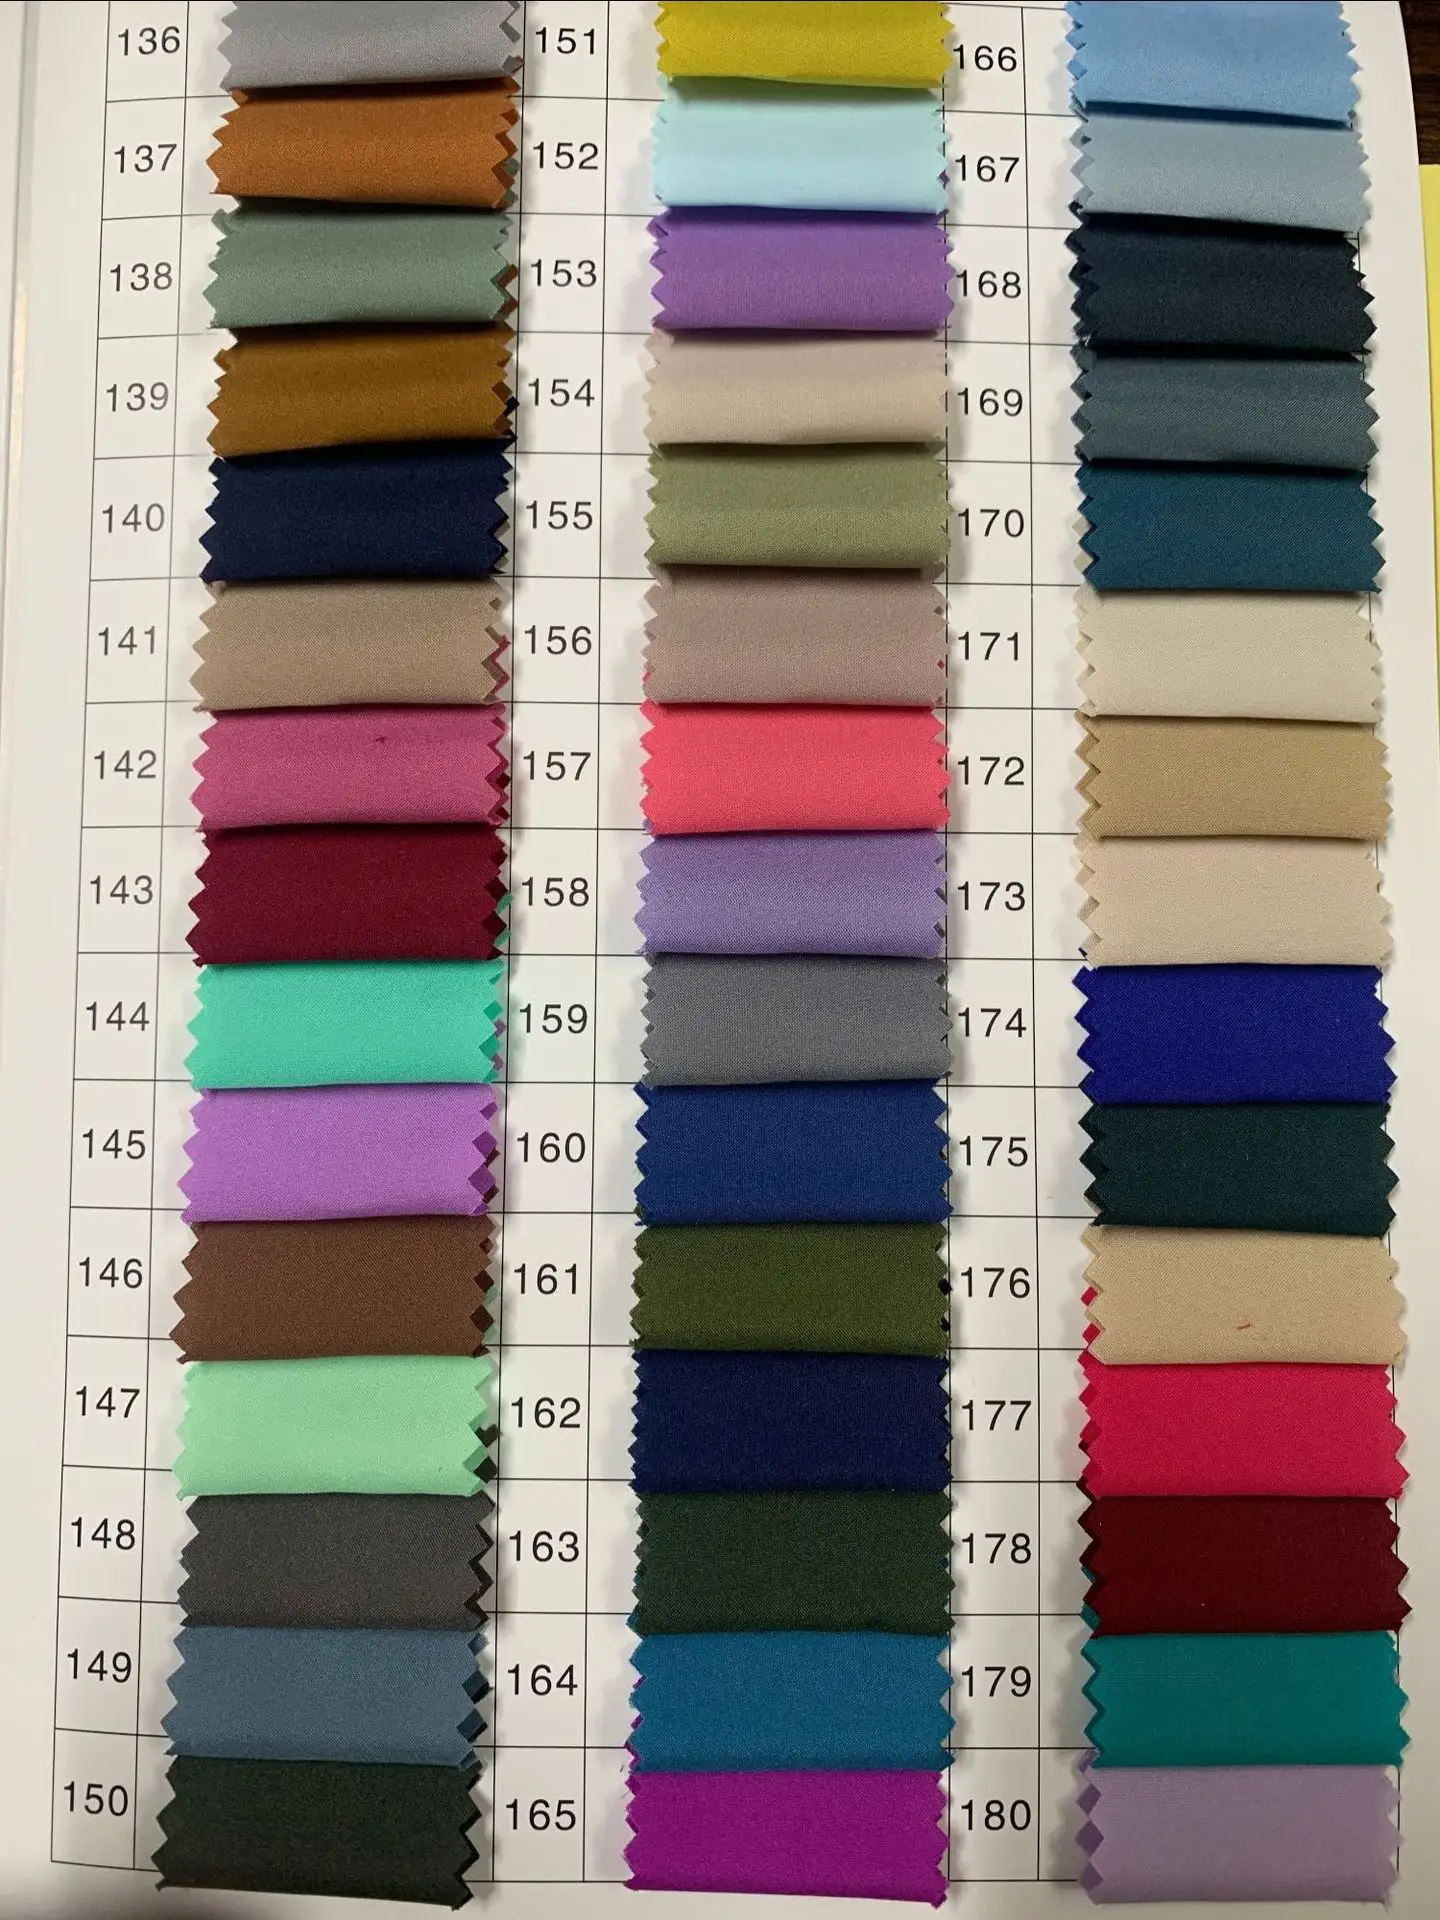 210d Waterproof Polyester Pu Coating Outdoor Oxford Fabric For Bag Lining Tent Material